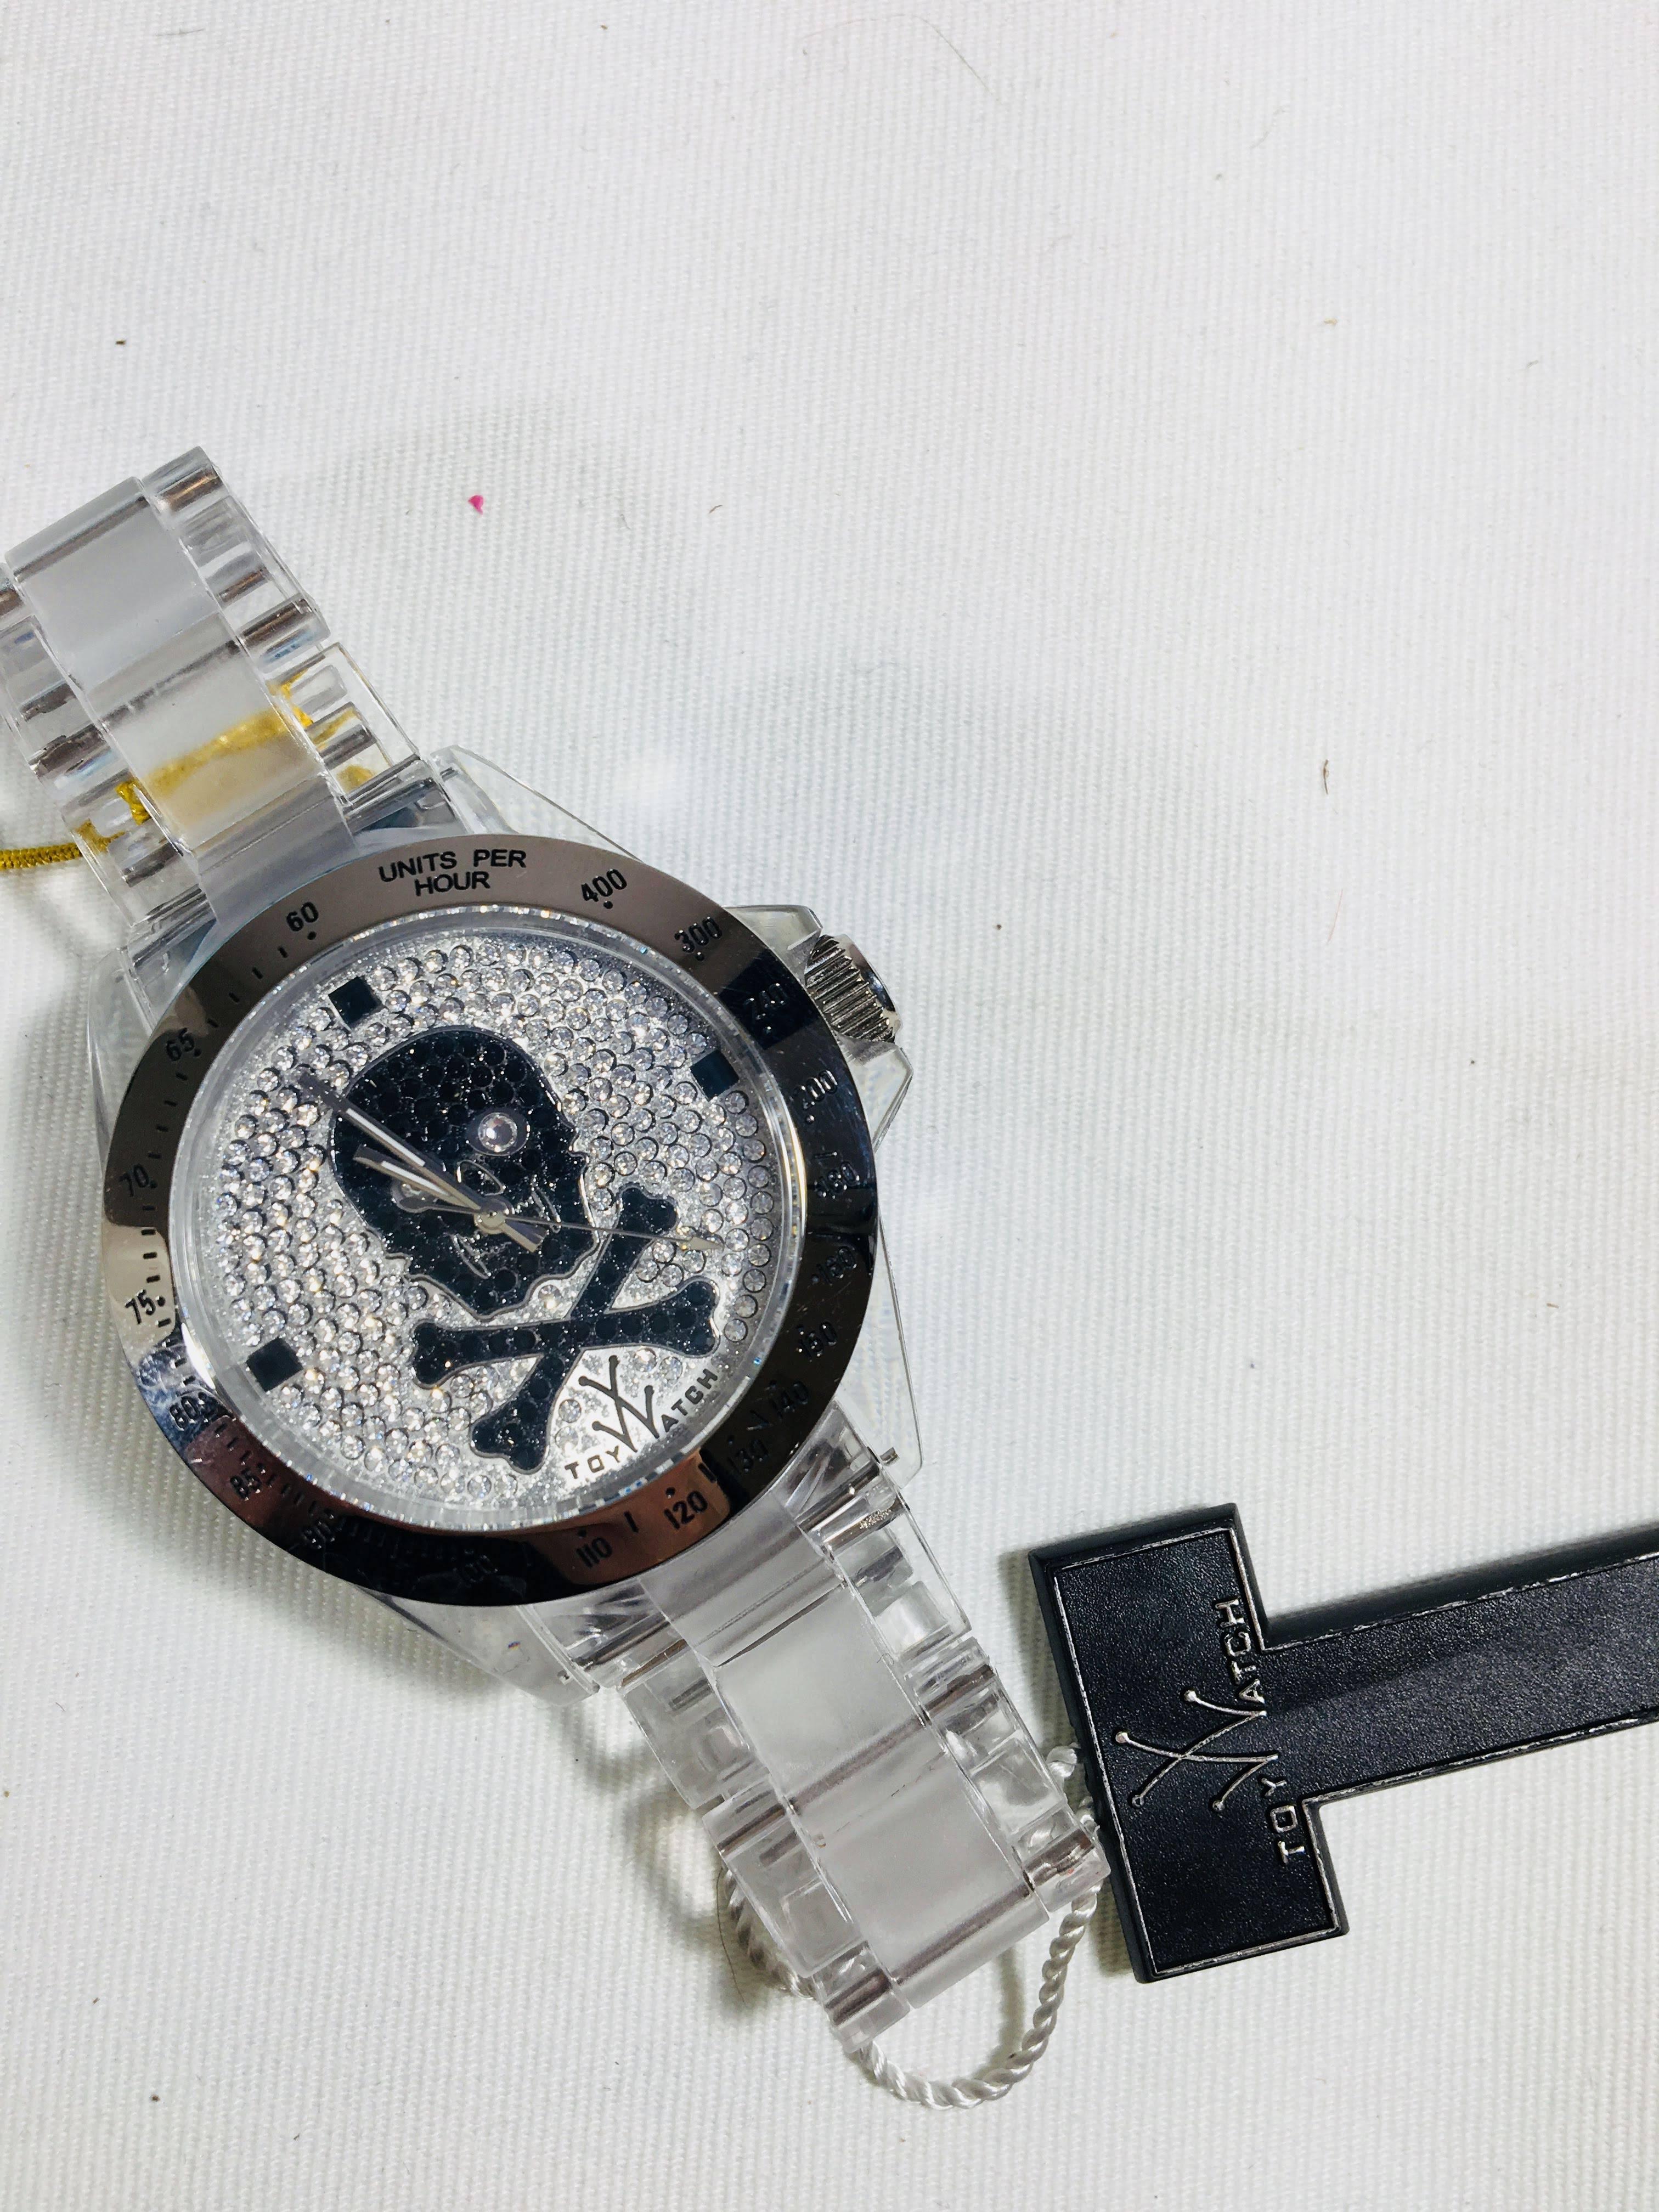 Toy Watch in Black and Silver Rhinestone Skull Face with Translucent Band.